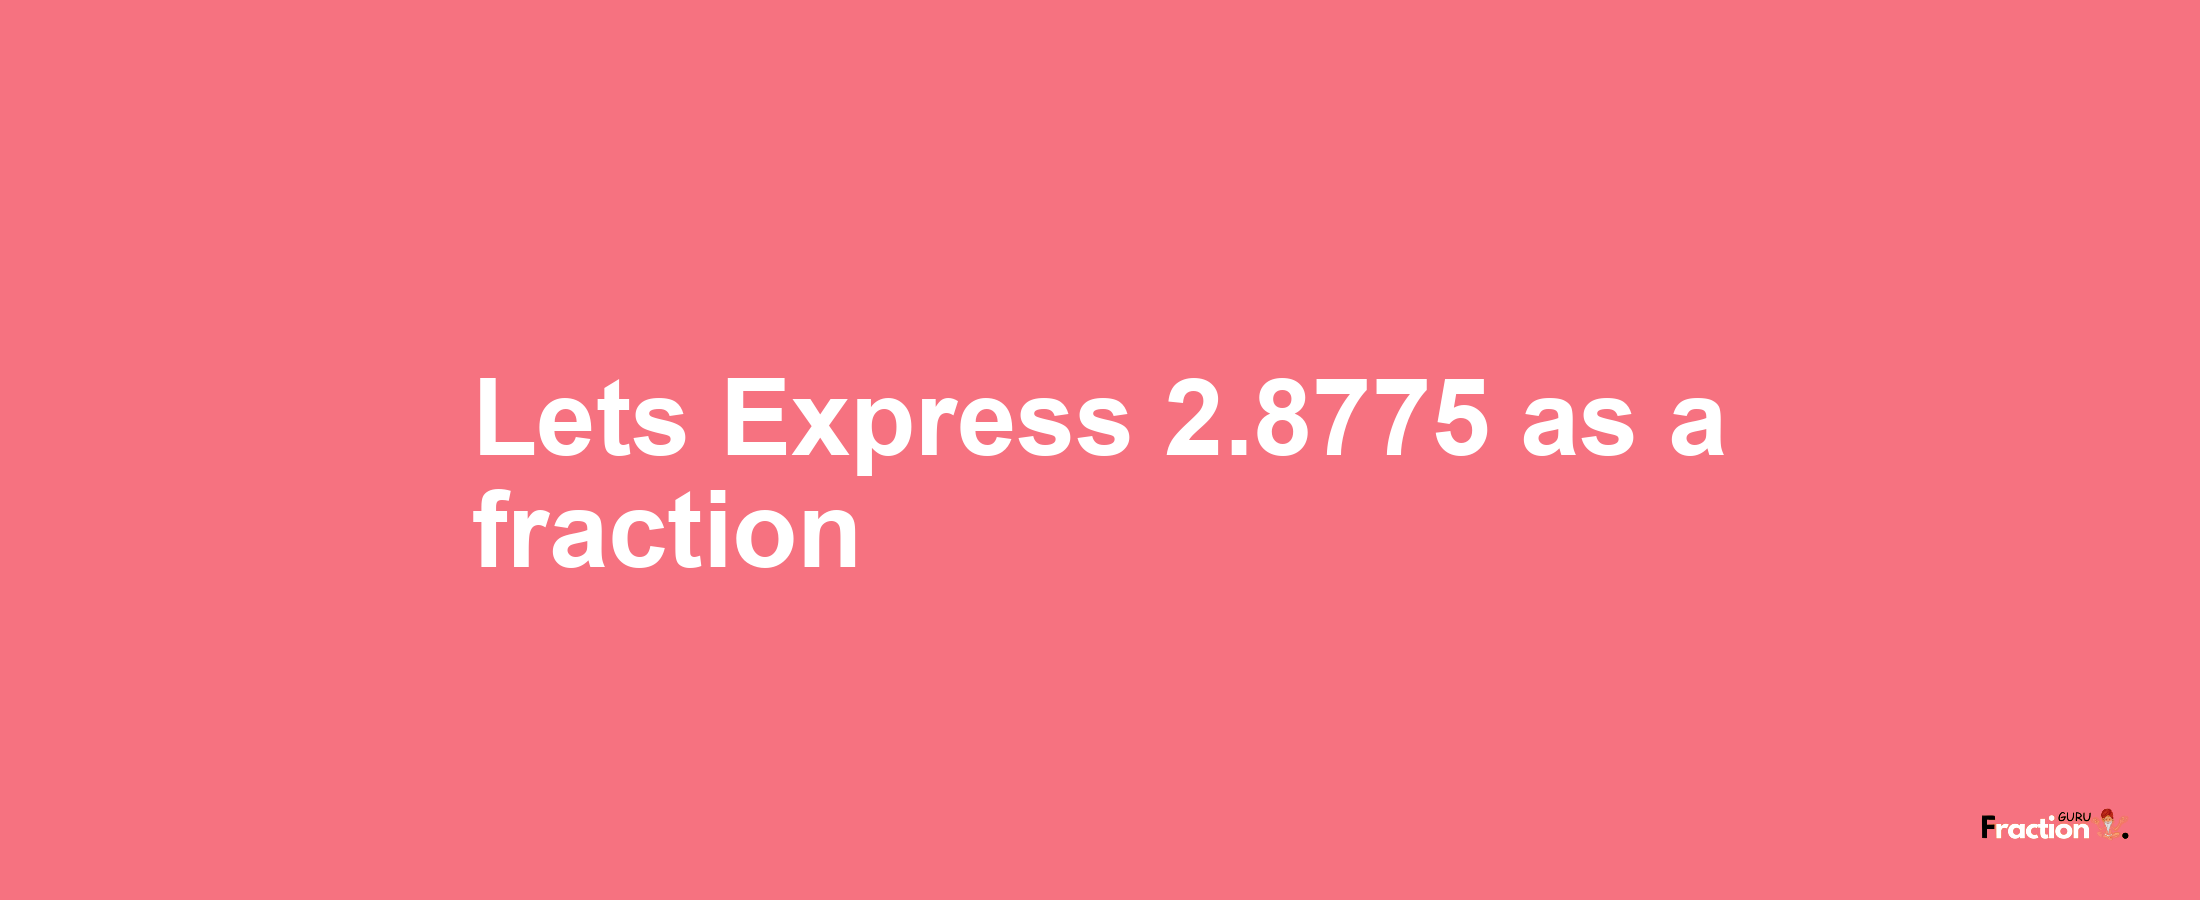 Lets Express 2.8775 as afraction